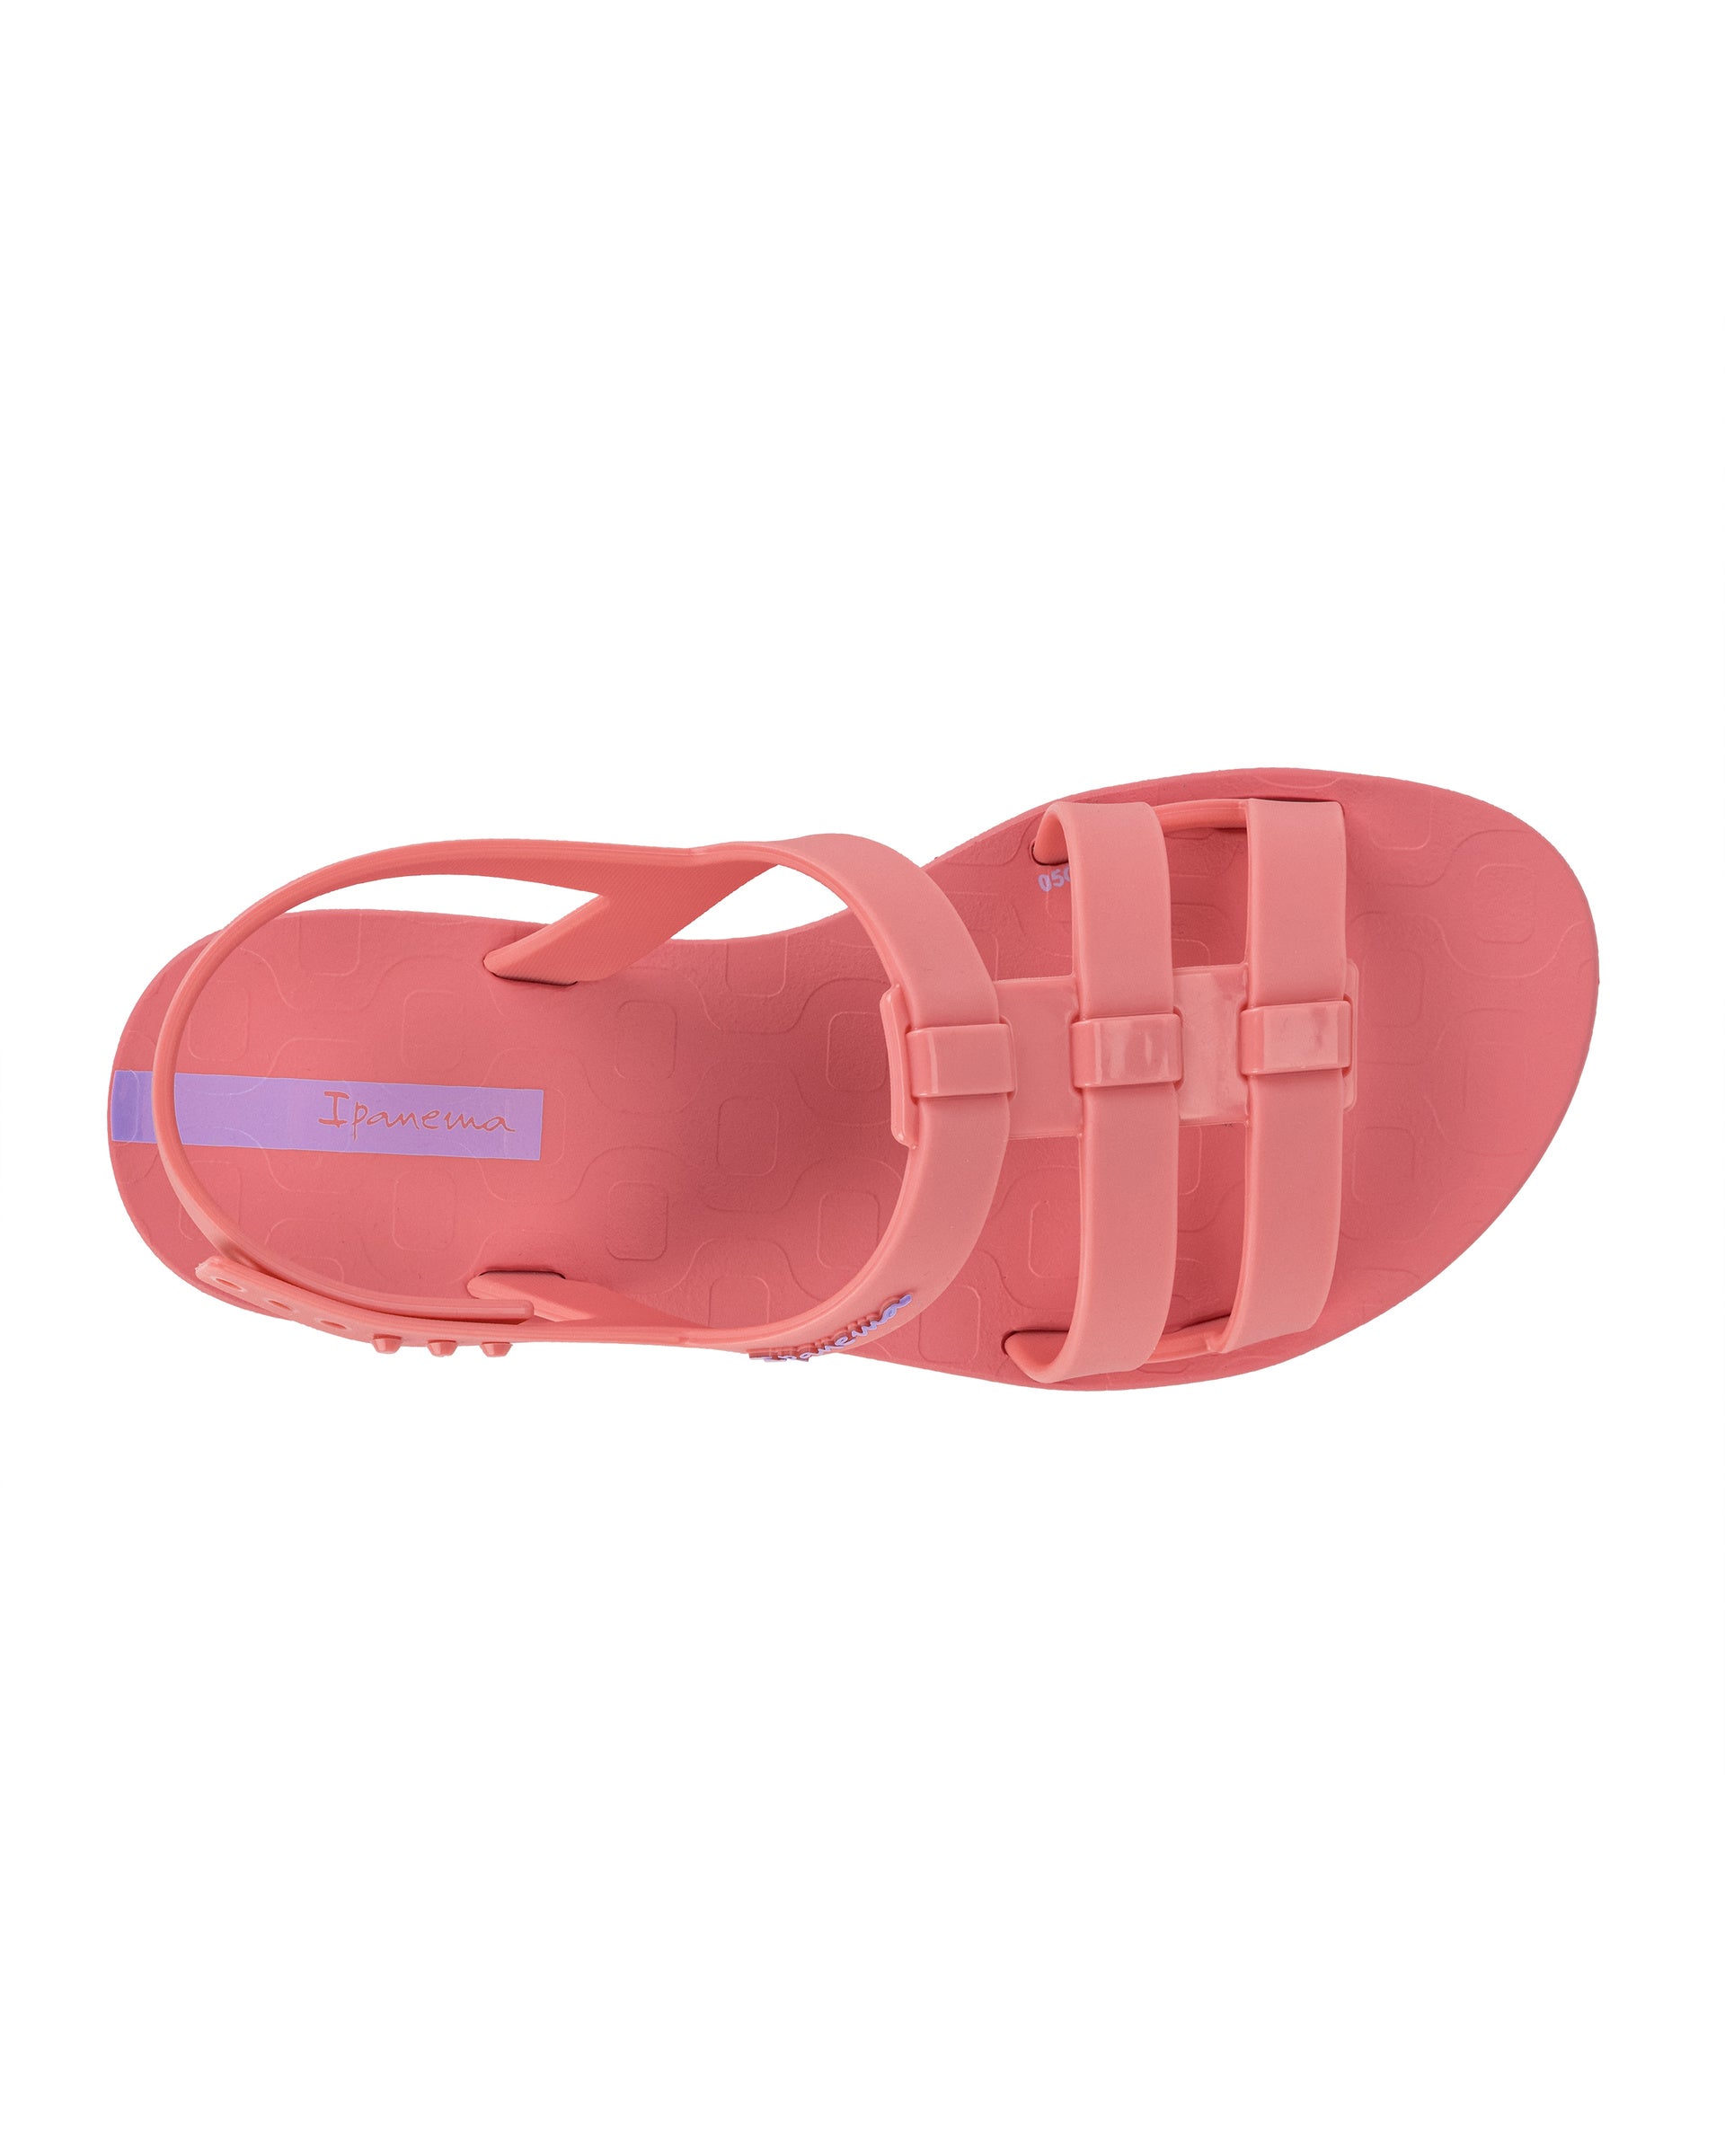 Top view of a pink Ipanema Class Go women's sandal.